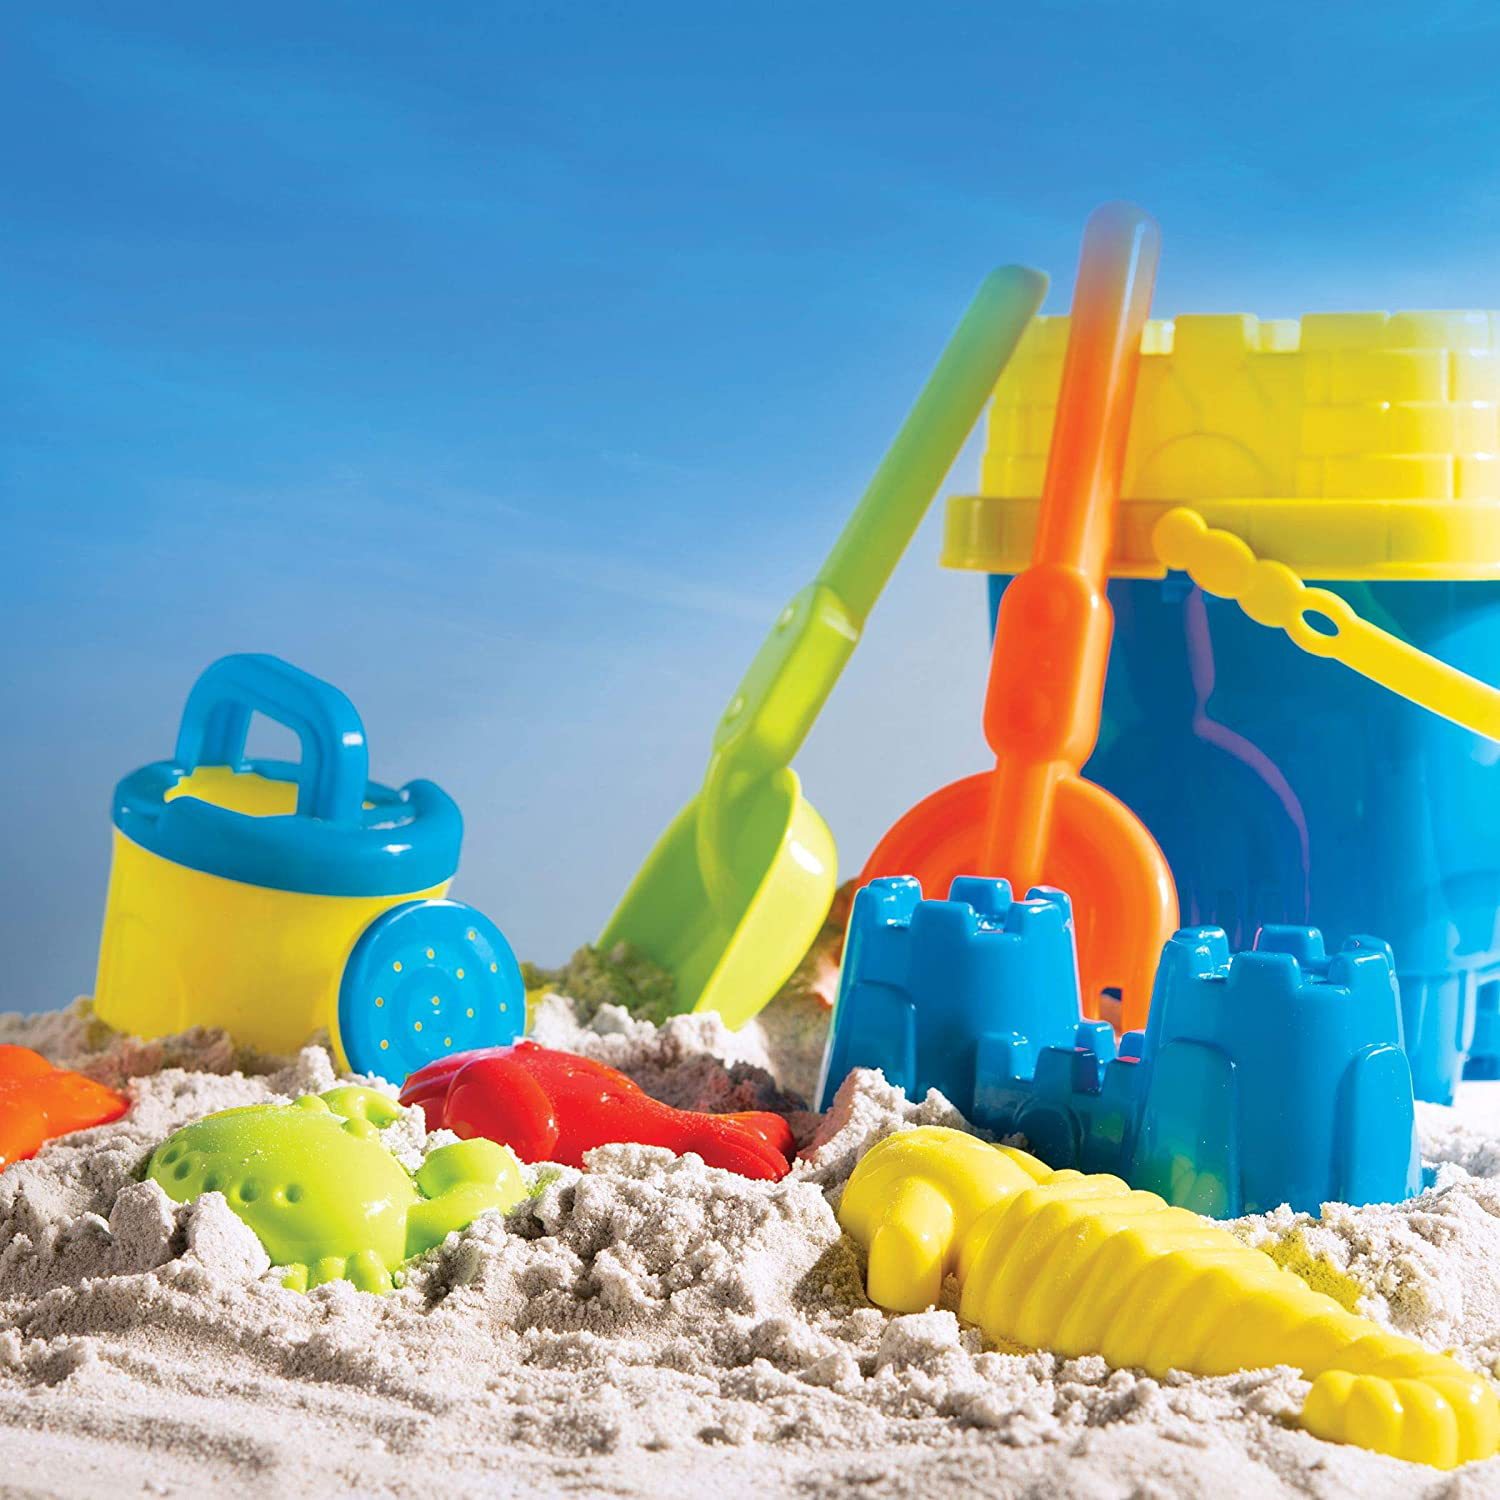 Prextex 10 Piece Beach Toys Sand Toys Set, Bucket with Sifter, Shovel, Rake, Watering Can, Animal and Castle Sand Molds